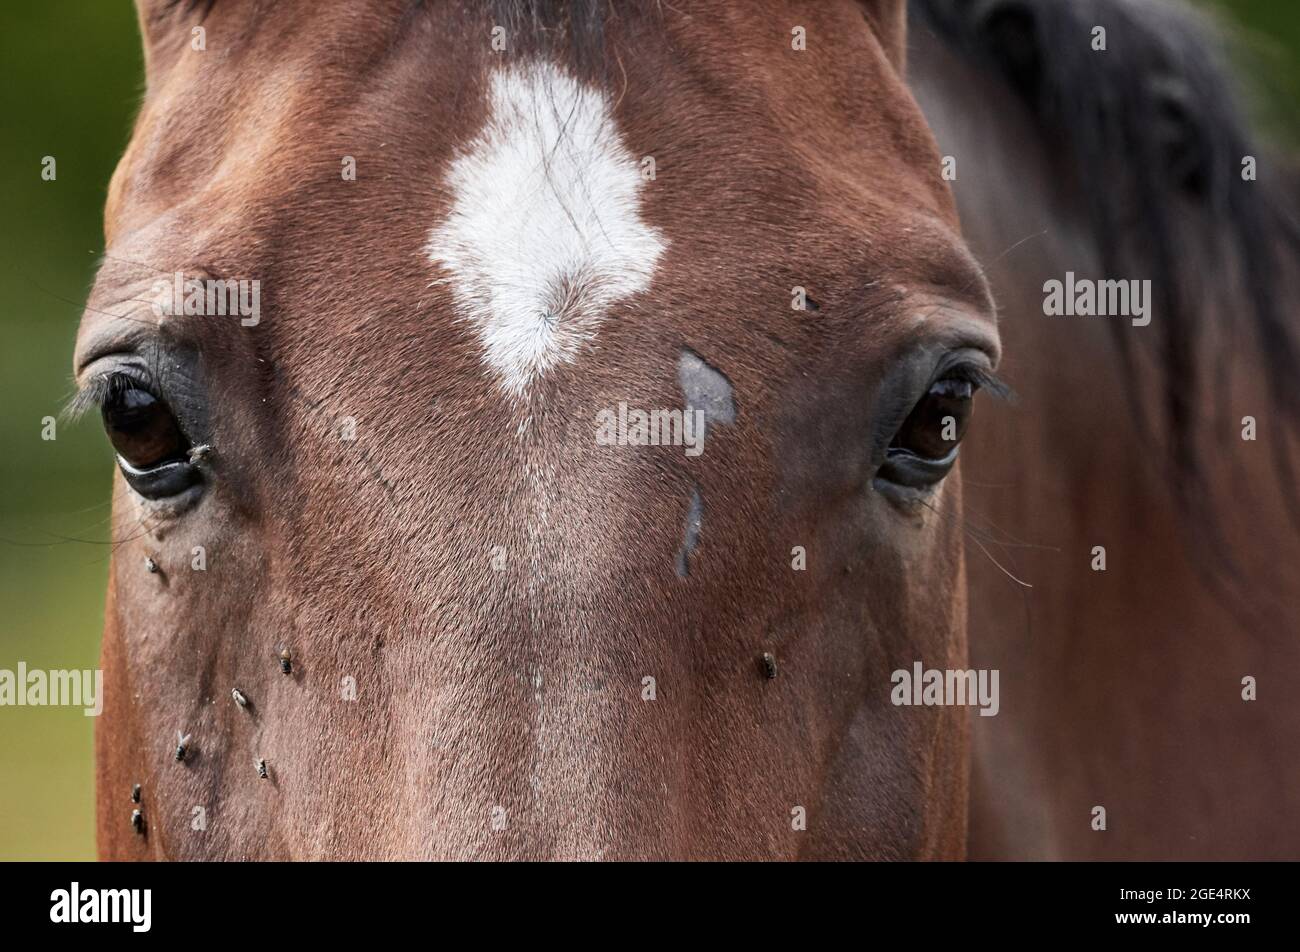 Brown horse's head close-up with lots of flies around the eyes. Stock Photo